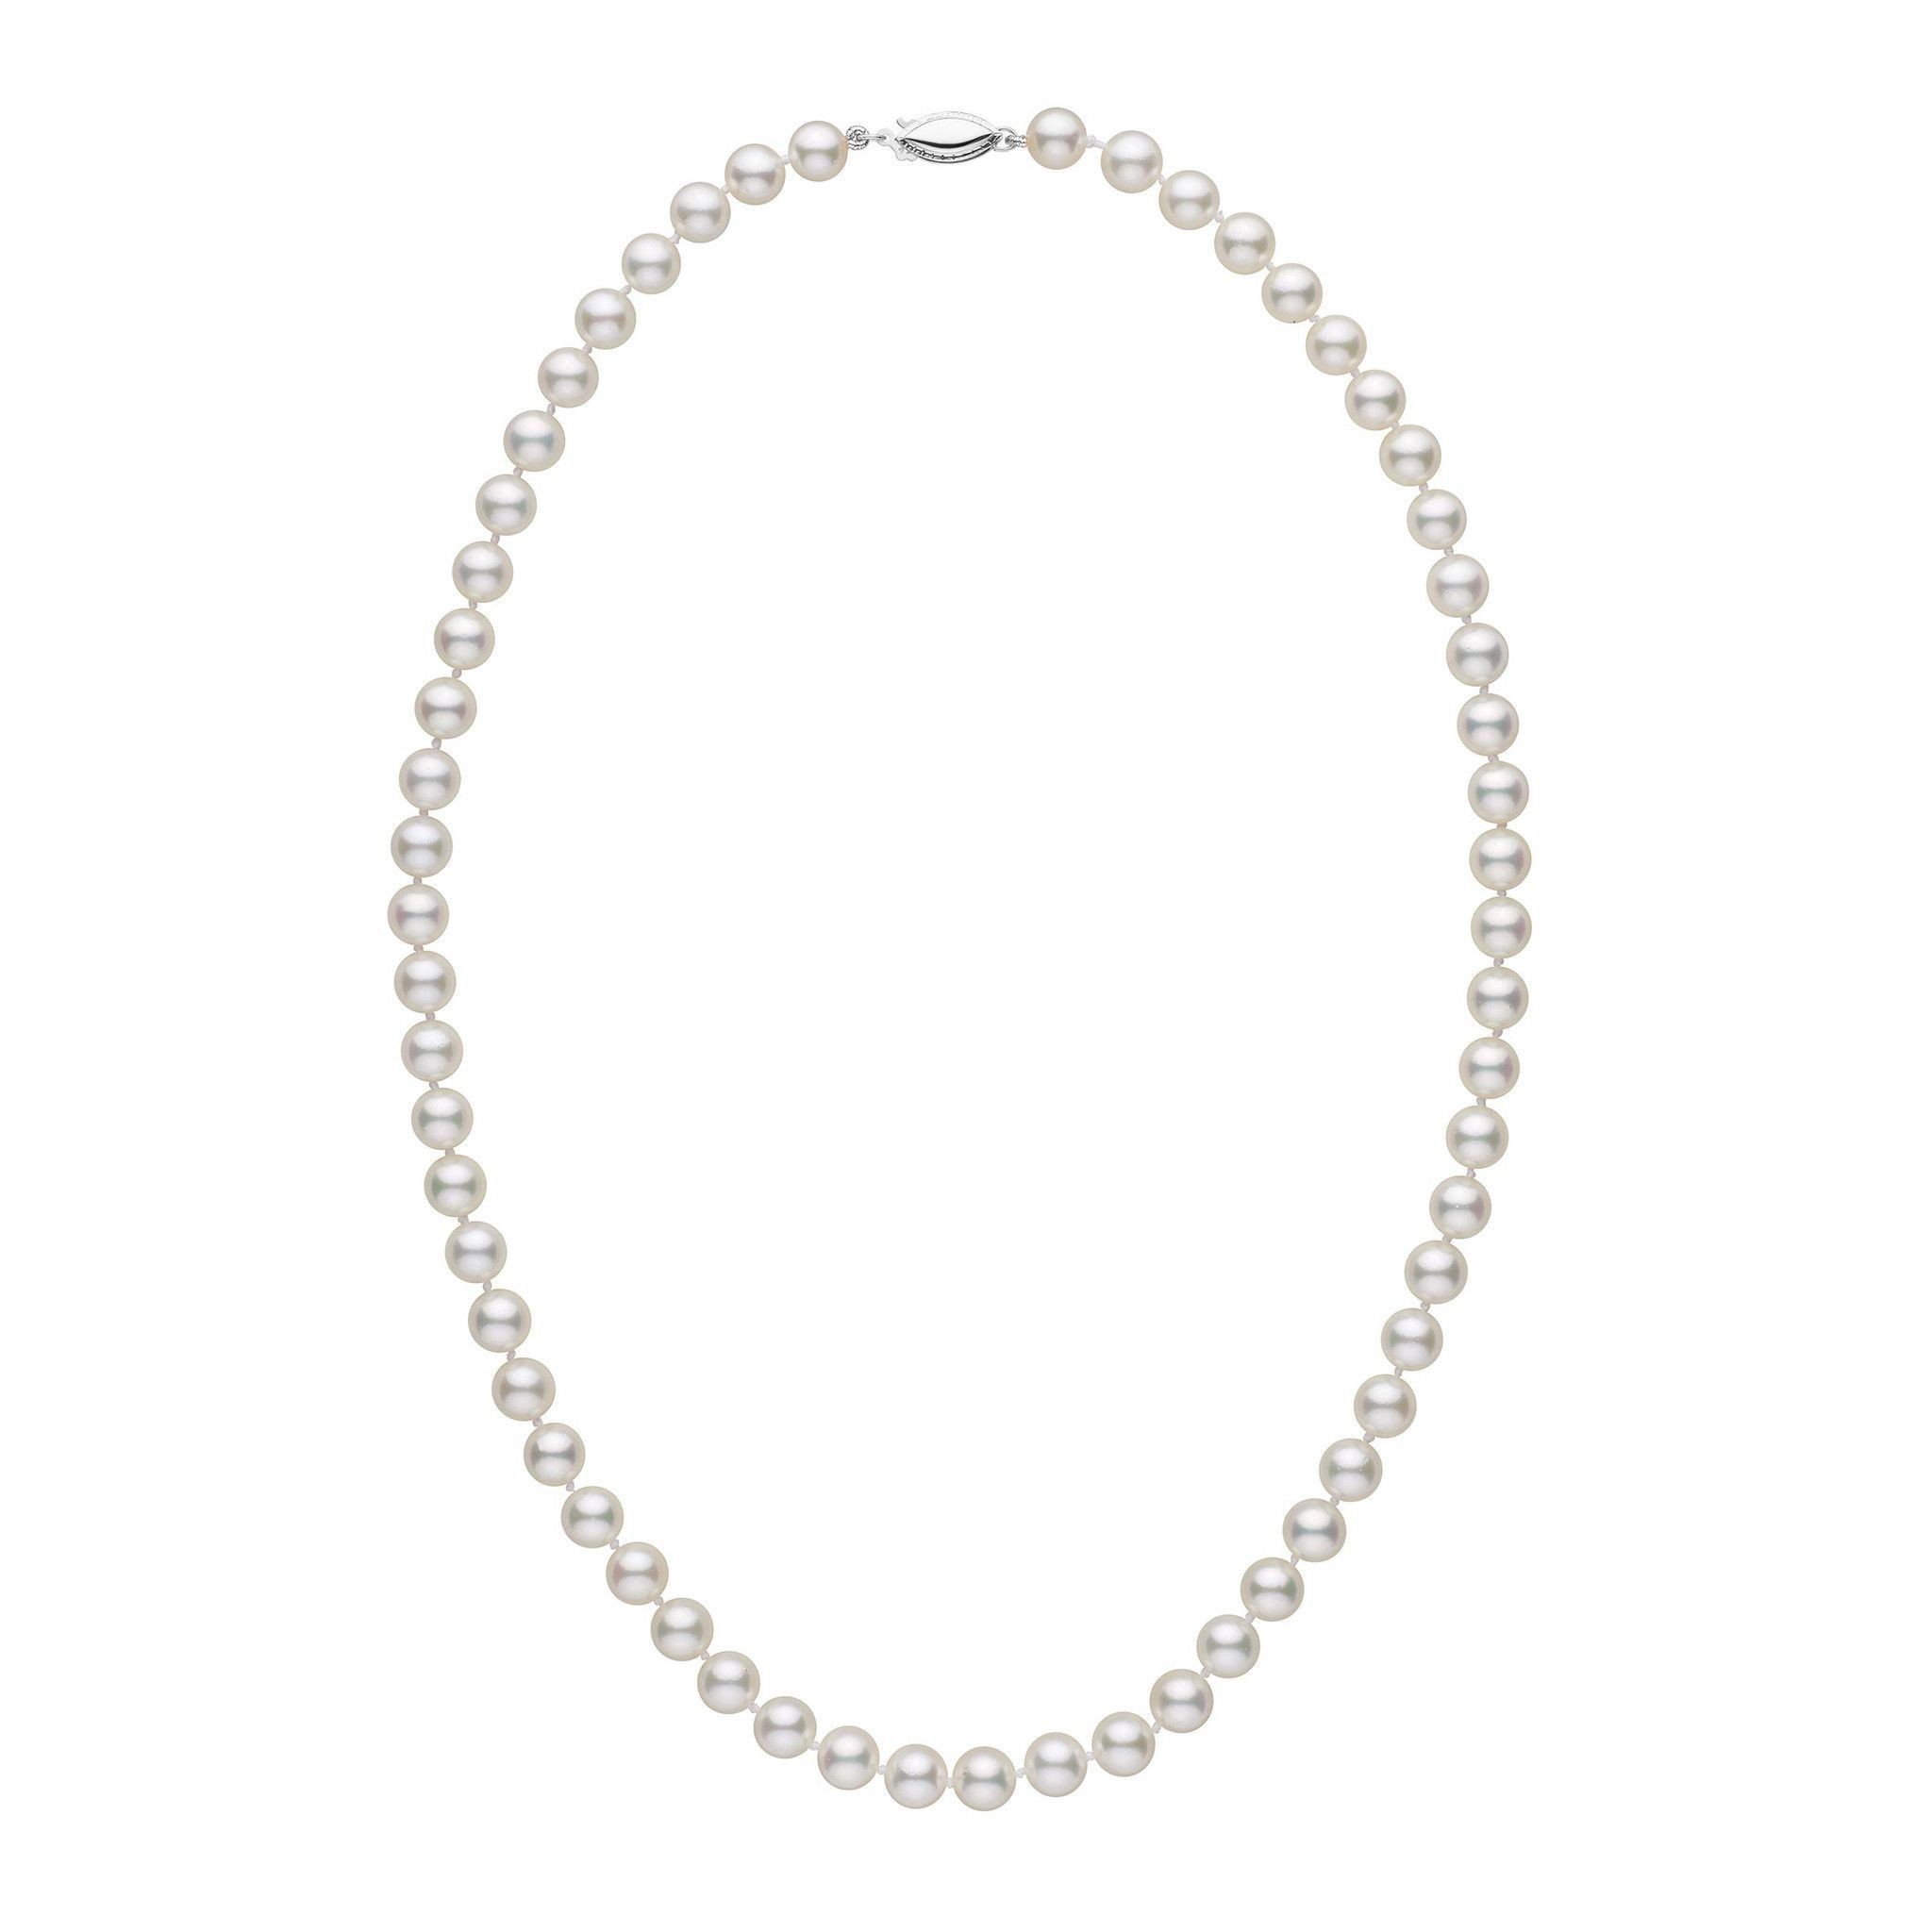 6.5-7.0 mm 18 Inch AA+ White Akoya Pearl Necklace White Gold